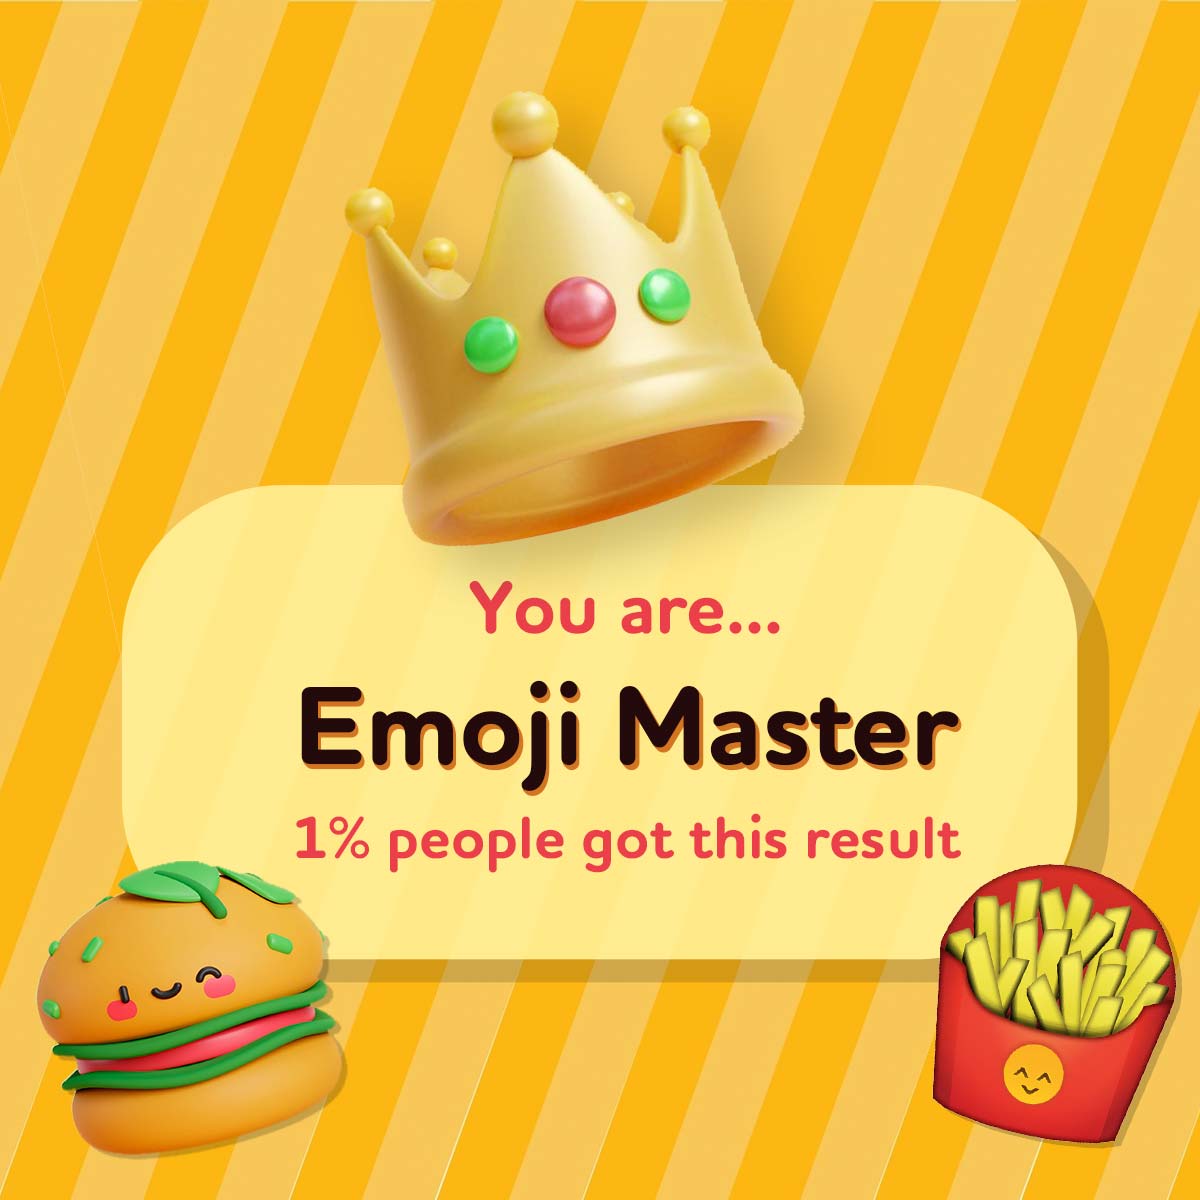 You got 24 out of 24! Only 1% Can Guess All the Fast Food Chains from Emojis Alone 🍔 🍟 🍕